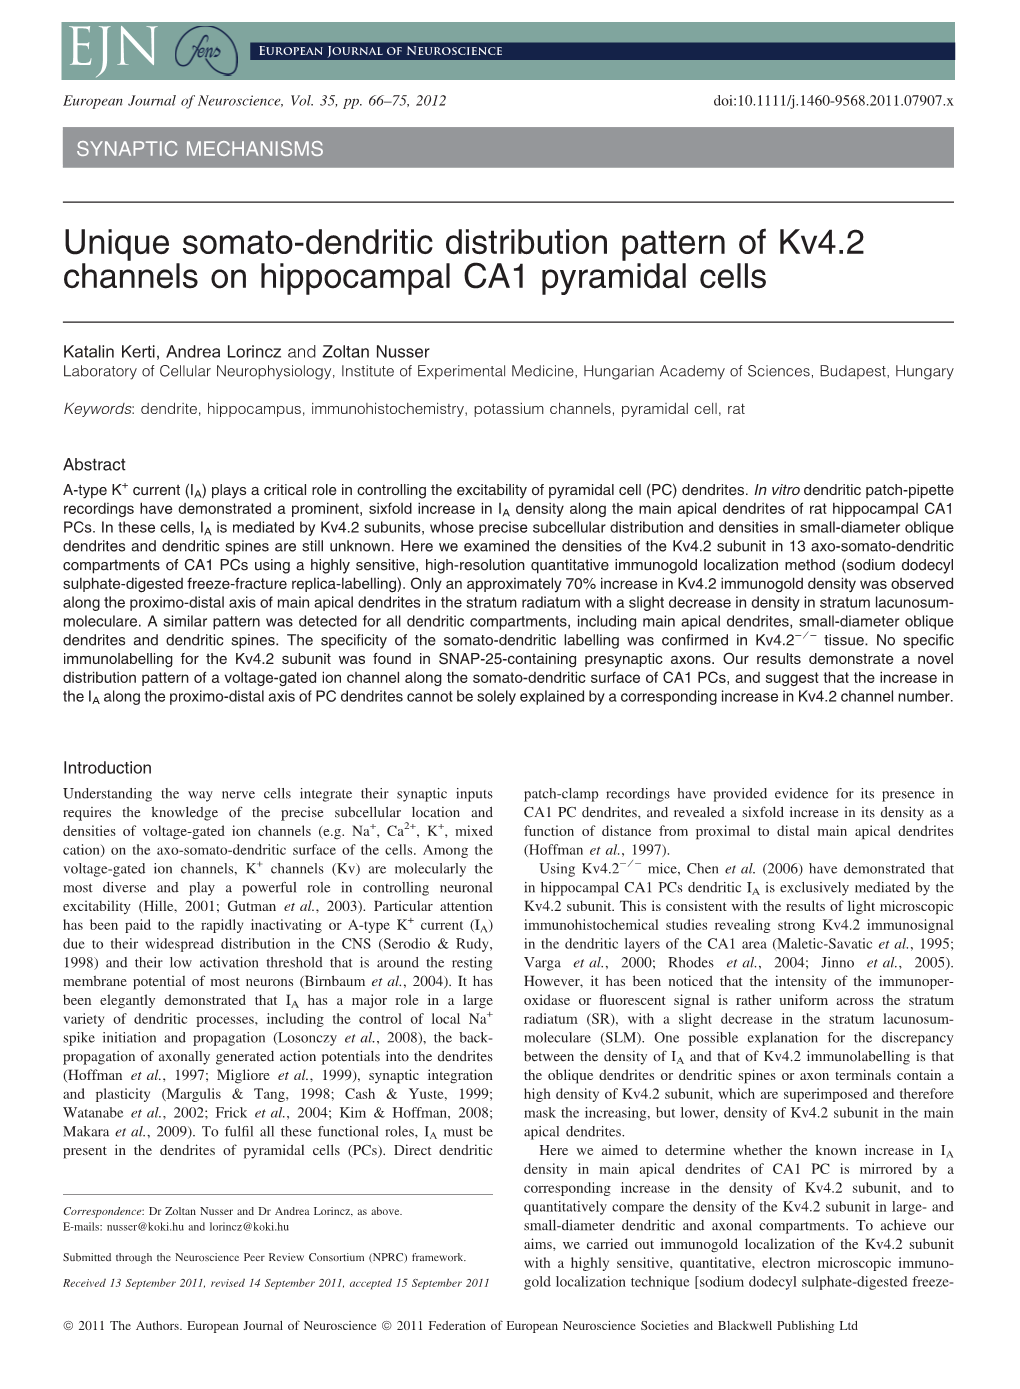 Unique Somatodendritic Distribution Pattern of Kv4.2 Channels On